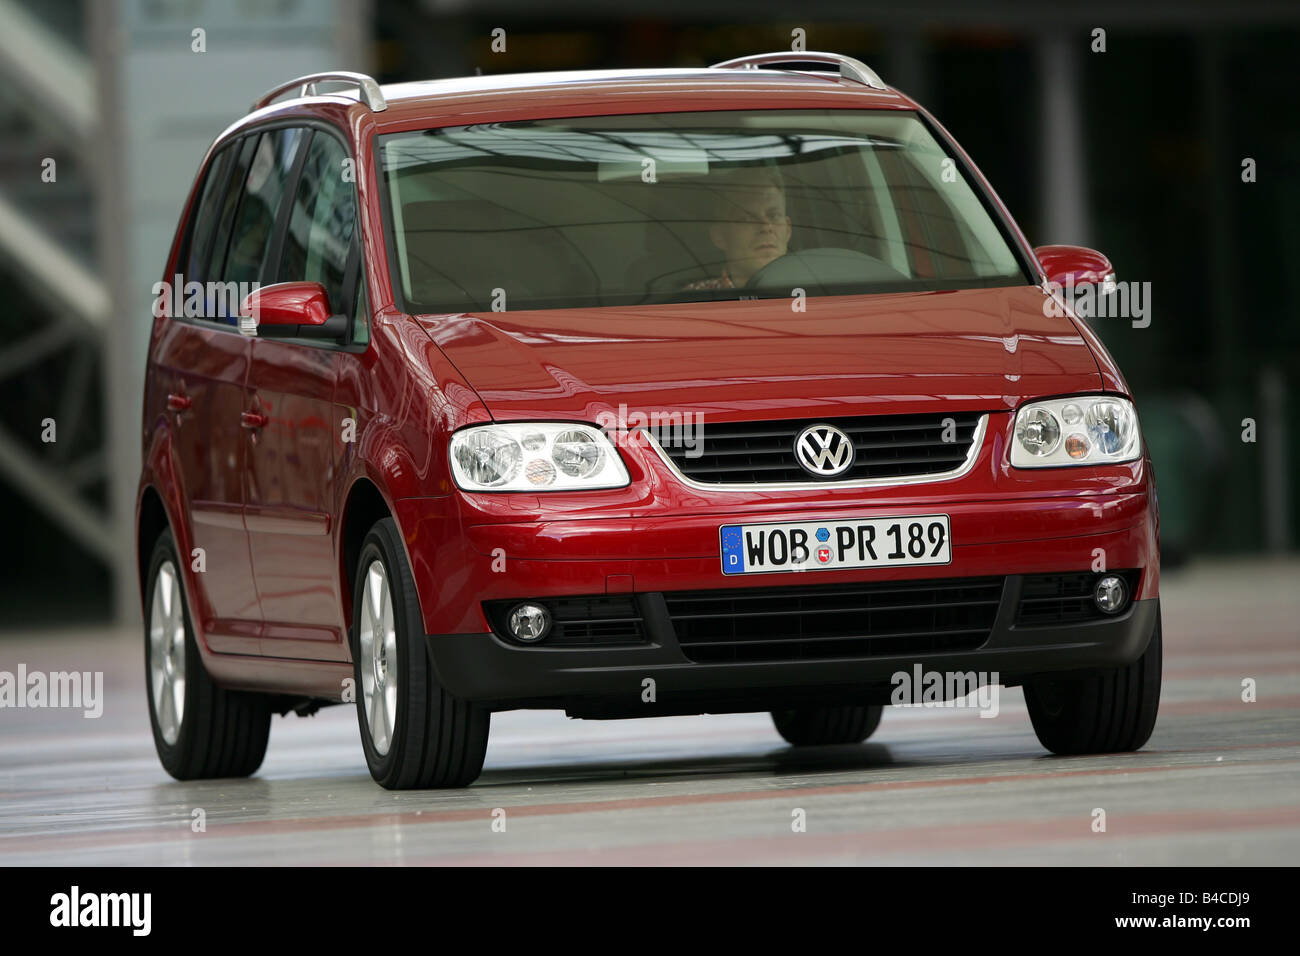 Car, VW Volkswagen Touran 2.0 TDI, model year 2005-, red, Van, driving,  diagonal from the front, frontal view, City, photographe Stock Photo - Alamy